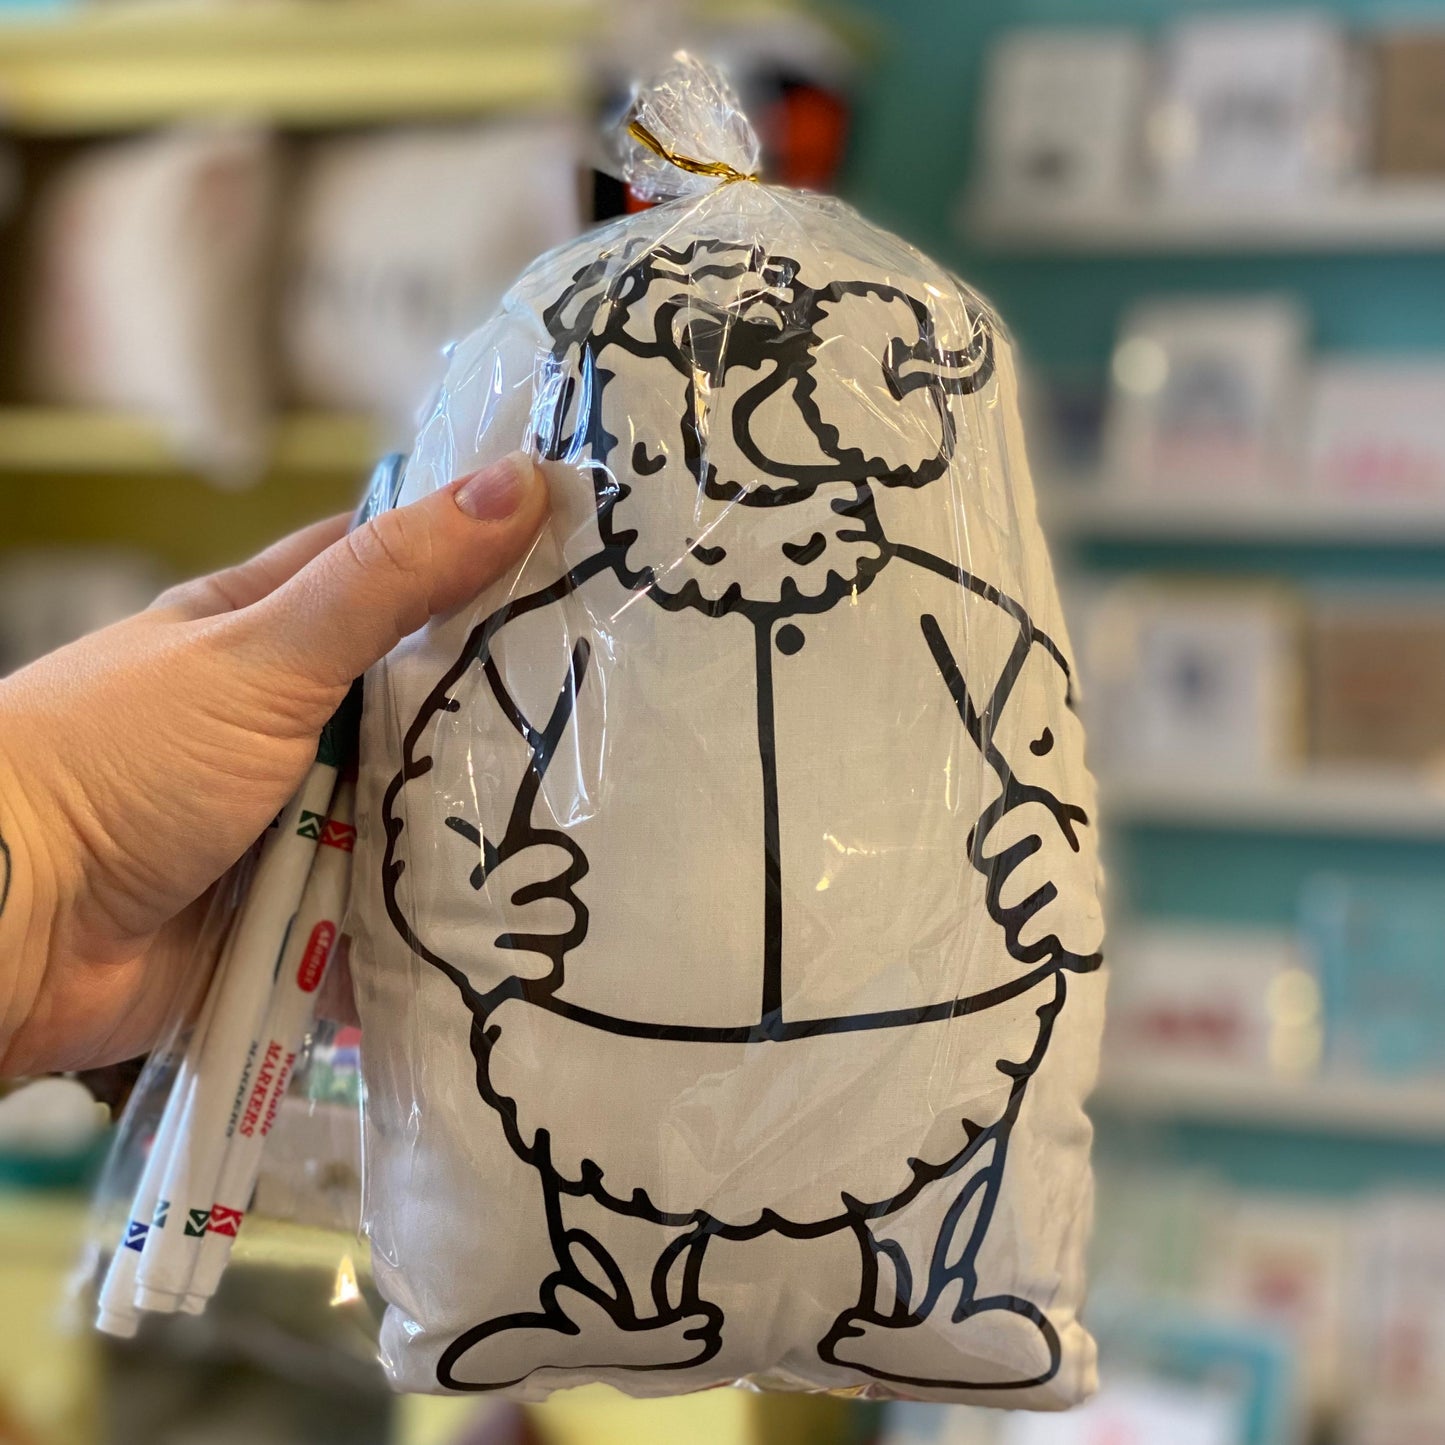 A hand holding a packaged plush toy of the Phanatic, with its characteristic round belly and quirky appearance, in a store by Doodle Jawnz Washable Kits.